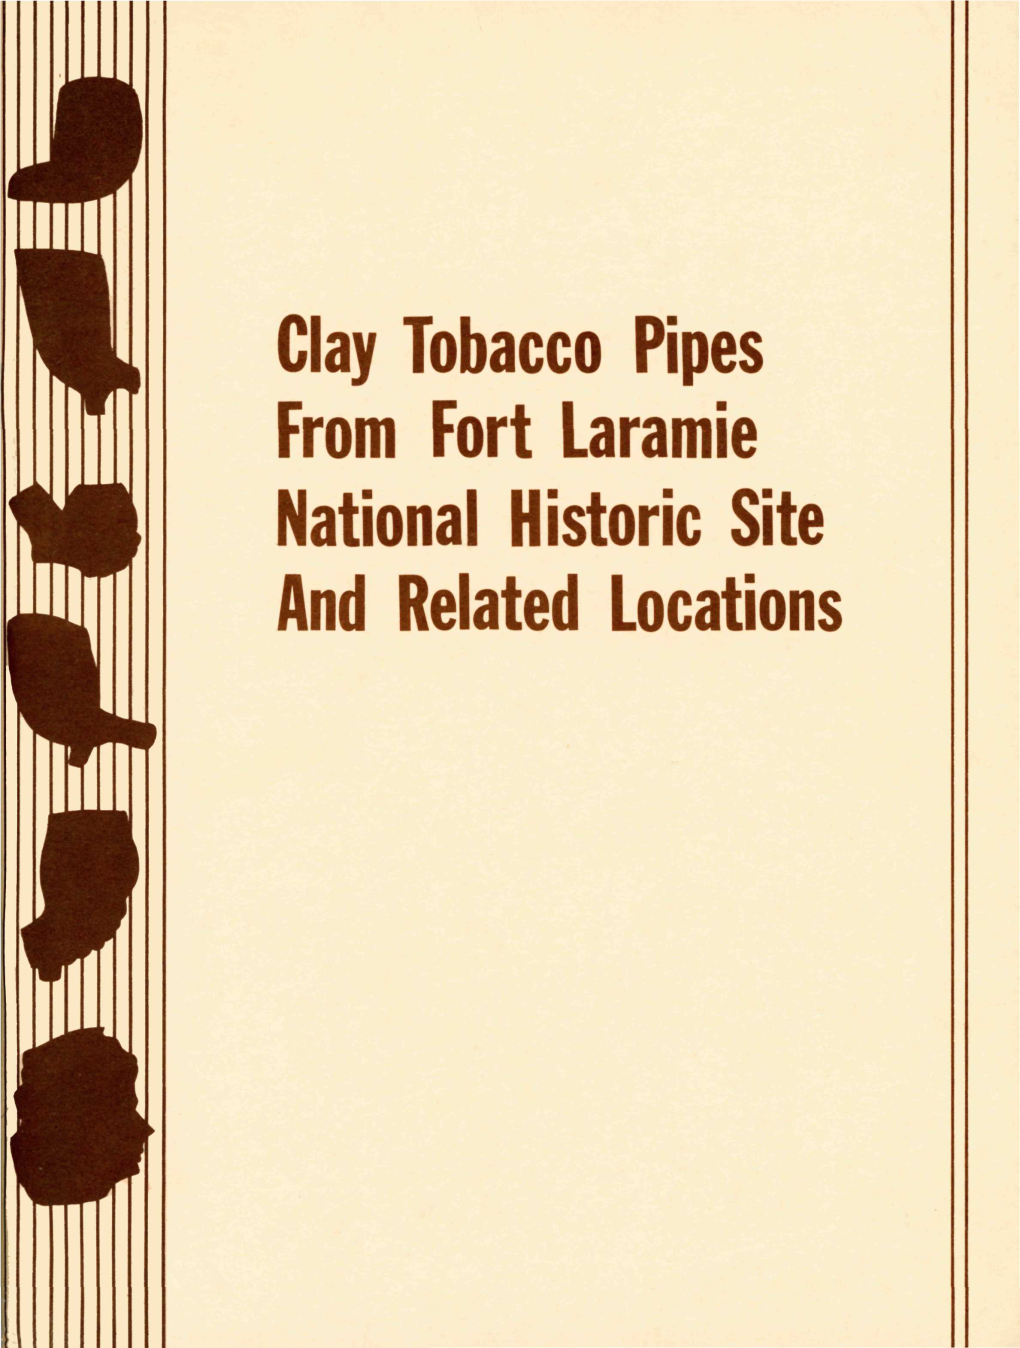 Clay Tobacco Pipes from Fort Laramie National Historic Site and Related Locations CLAY TOBACCO PIPES